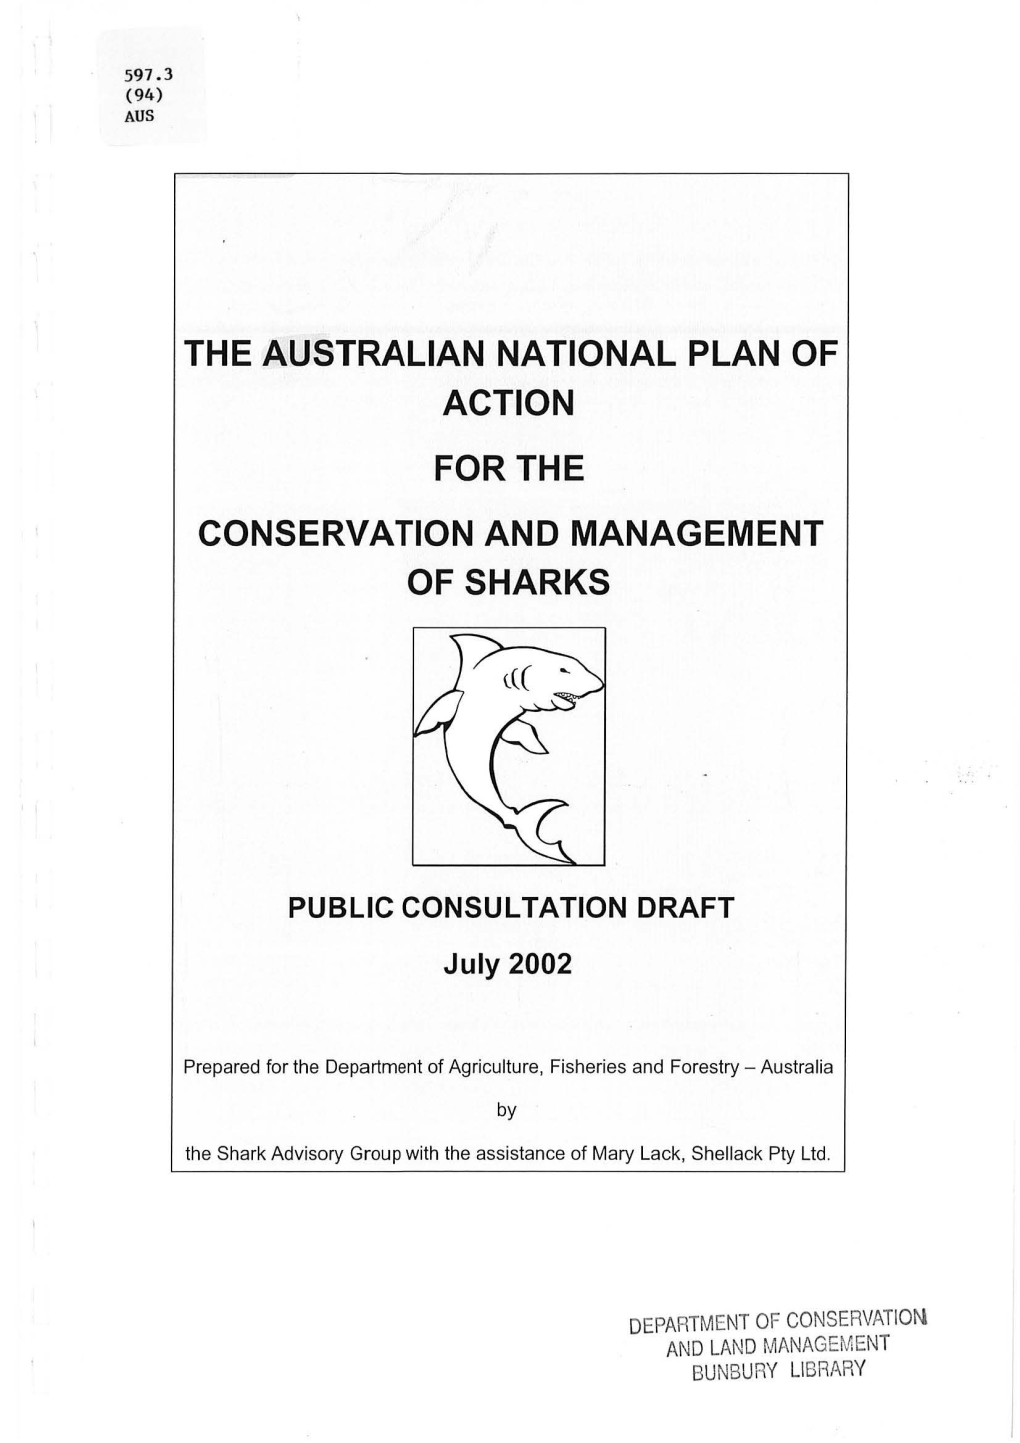 The Australian National Plan of Action for the Conservation and Management of Sharks